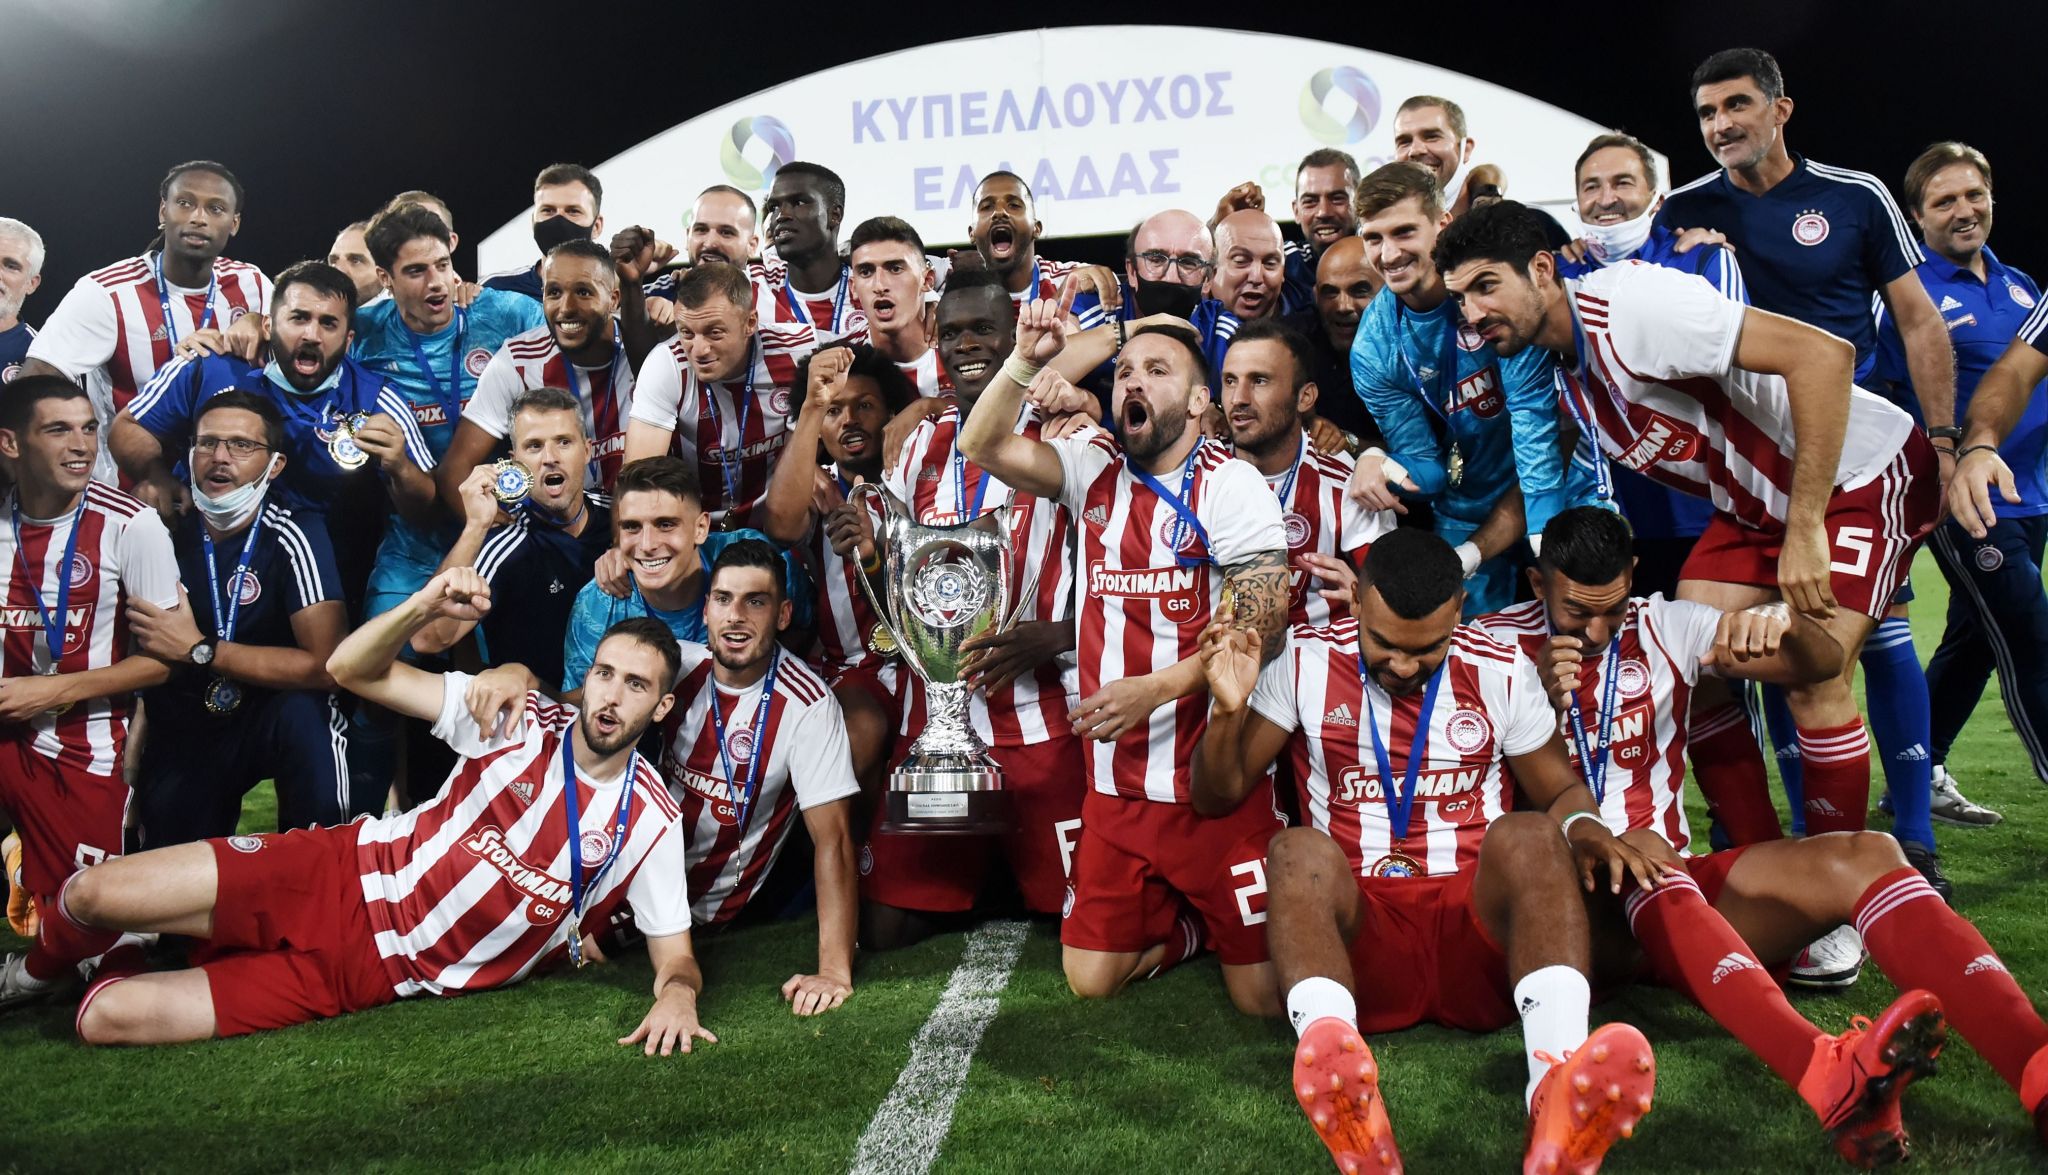 Olympiacos wins the 2019/20 double in Greece